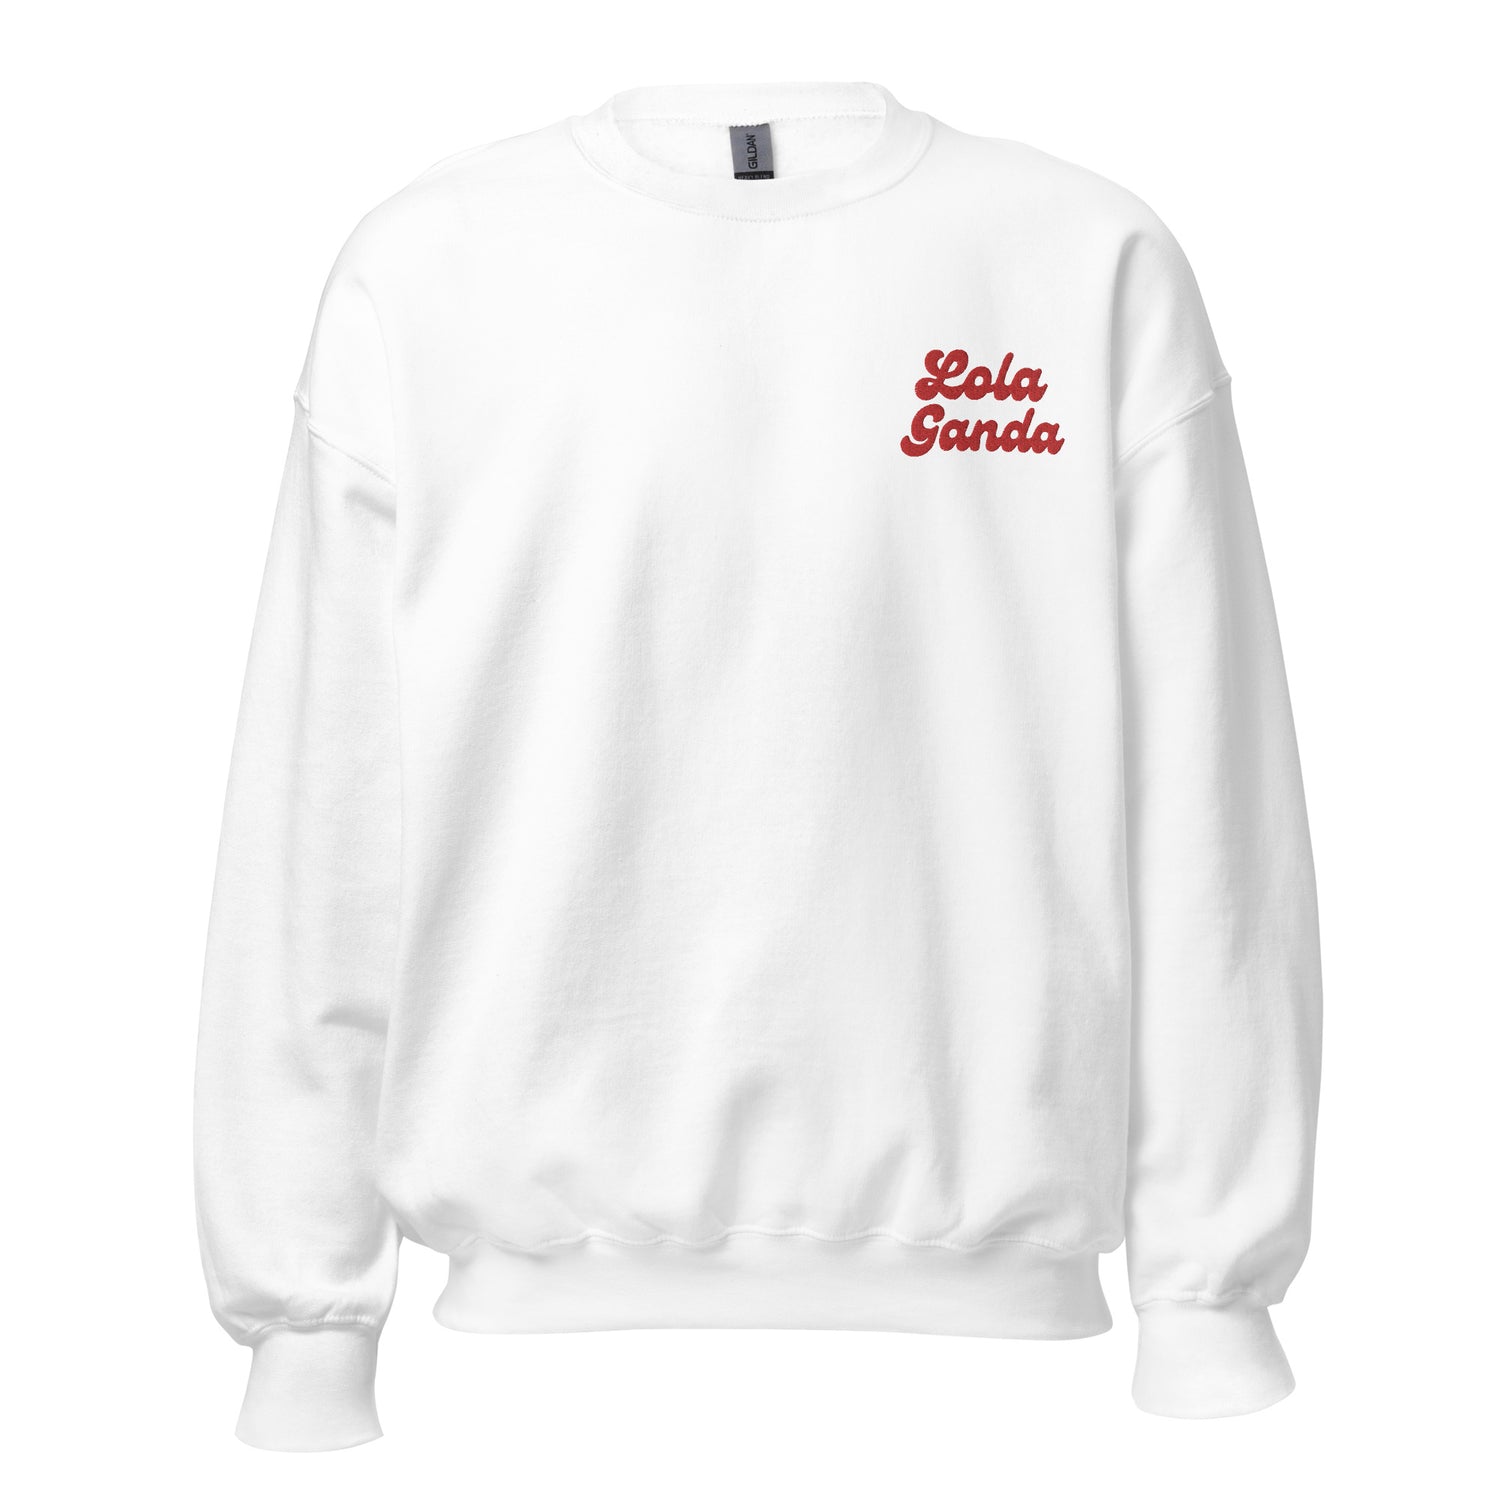 Filipino Sweatshirt Crew Neck Lola Ganda Grandmother Embroidered Mother's Day Gift in color variant White